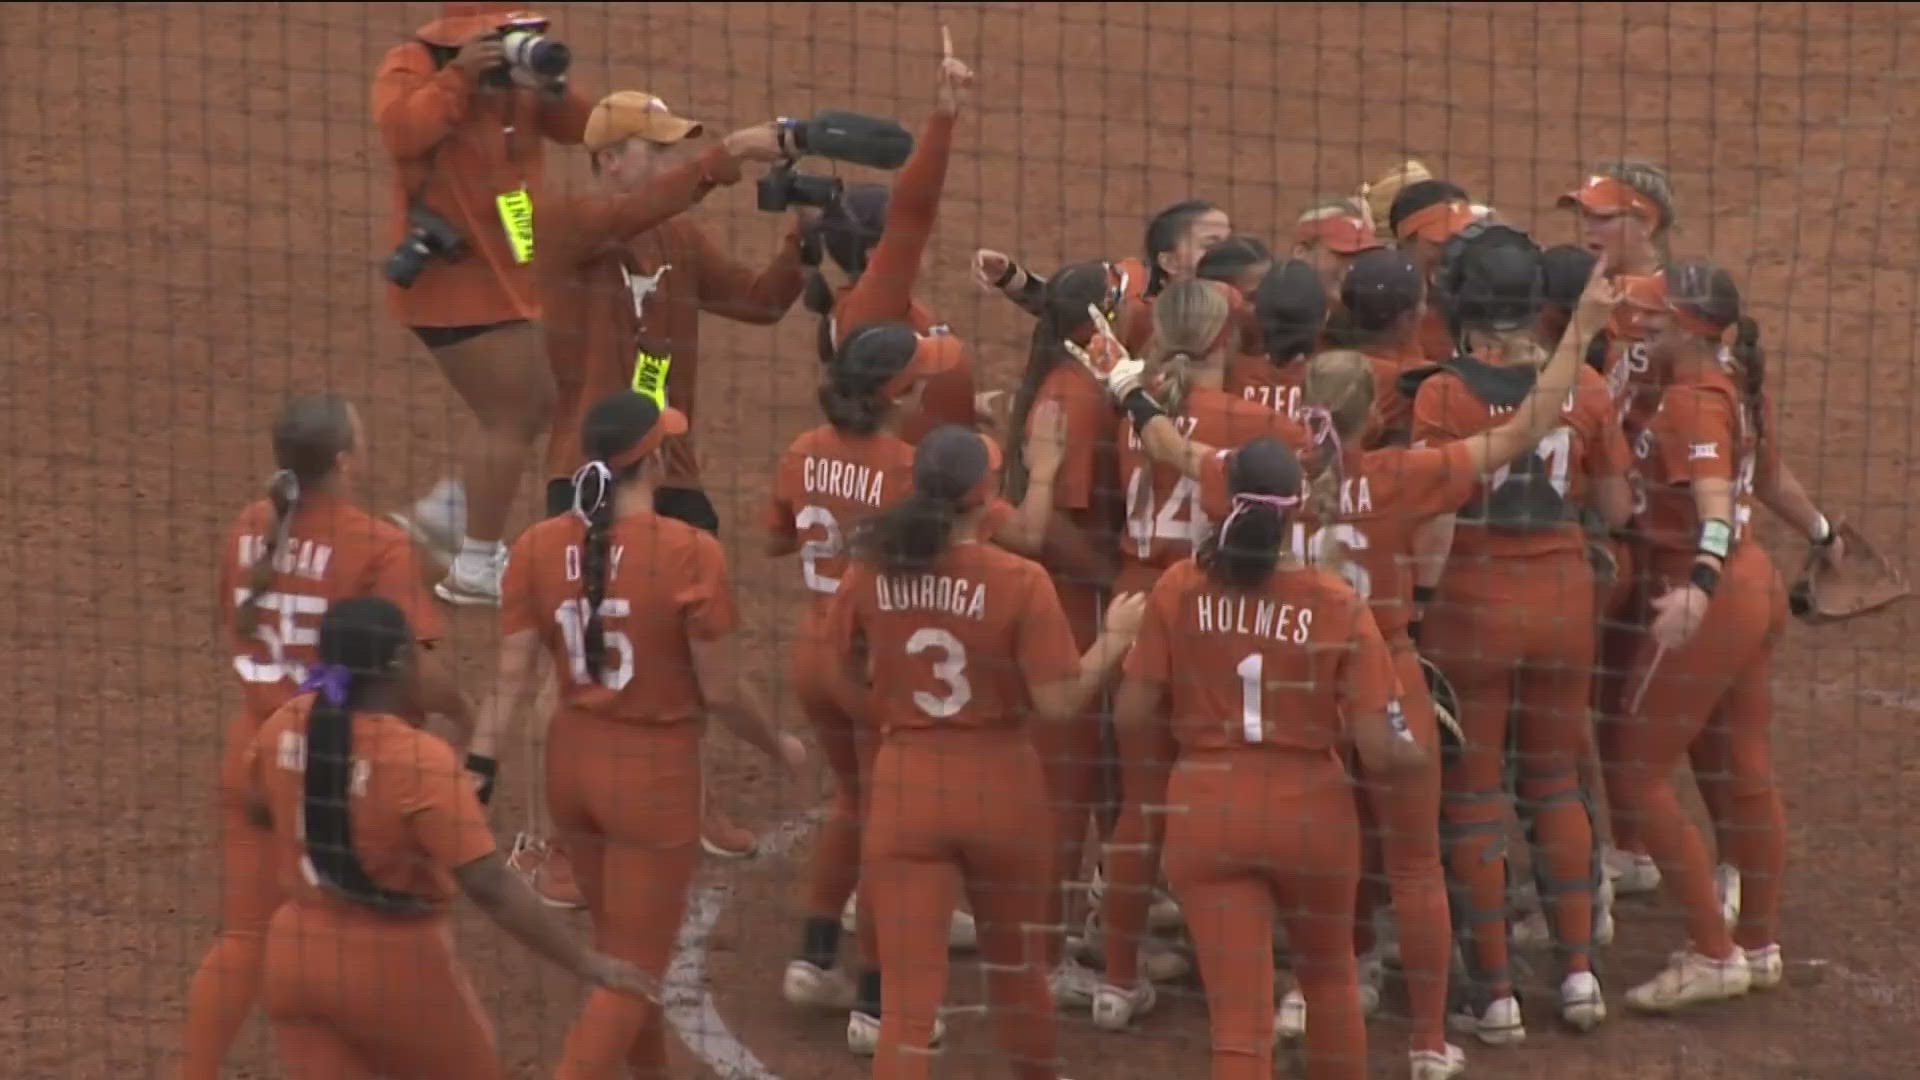 Texas battled Texas A&M in the Austin regional final on Sunday. The Longhorns beat the Aggies on Saturday.